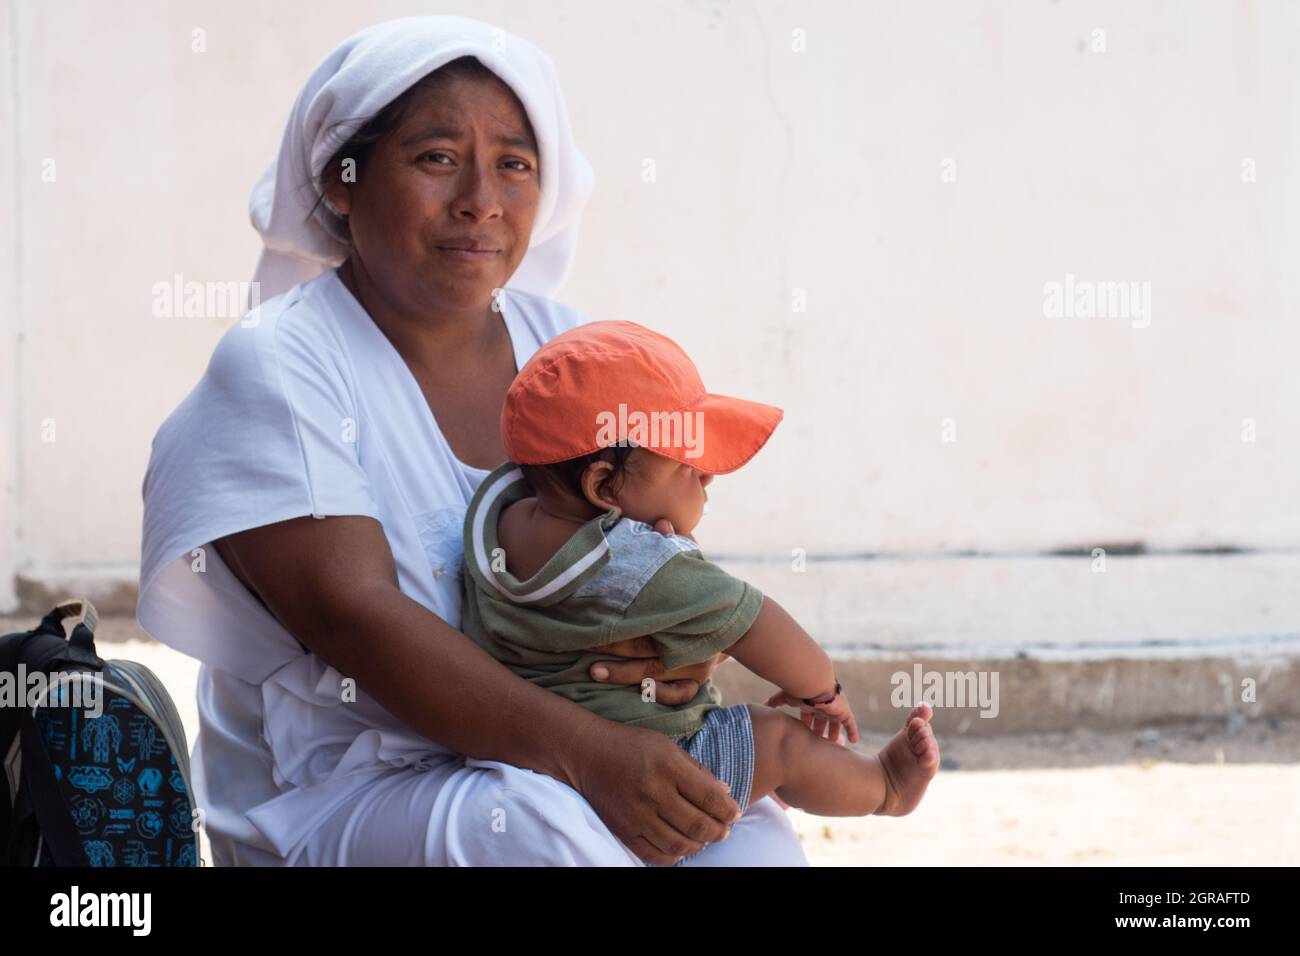 Mayapo, Colombia. 26th Sep, 2021. A Wayuu mother poses for a portrait with her son during a Humanitarian Mission developed by 'De Corazon Guajira' in Mayapo at La Guajira - Colombia were they visited the Wayuu indigenous communities 'Pactalia, Poromana, Perrohuila' on September 26, 2021. The Guajira region in Colombia is the poorest region in Colombia, with its people commongly living without drinkable water, electricity and food. Credit: Long Visual Press/Alamy Live News Stock Photo